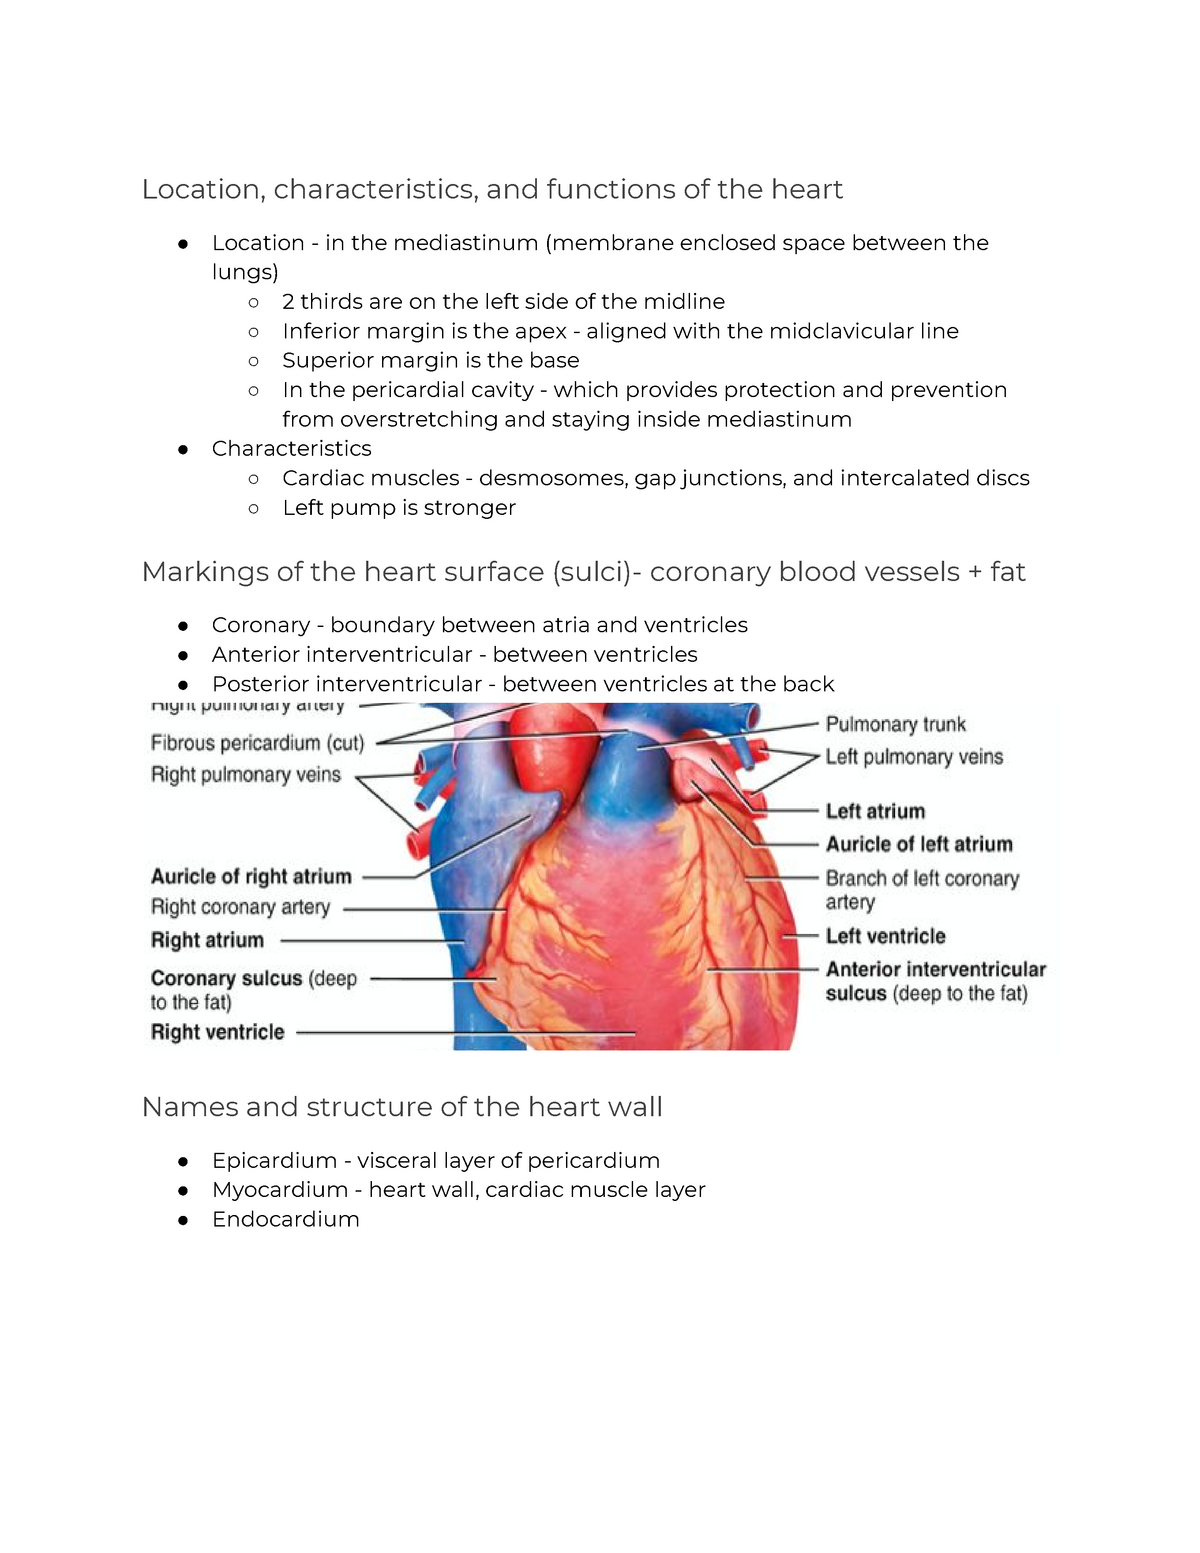 Chapter 13 The Heart Based On Exam Study Guide Studocu